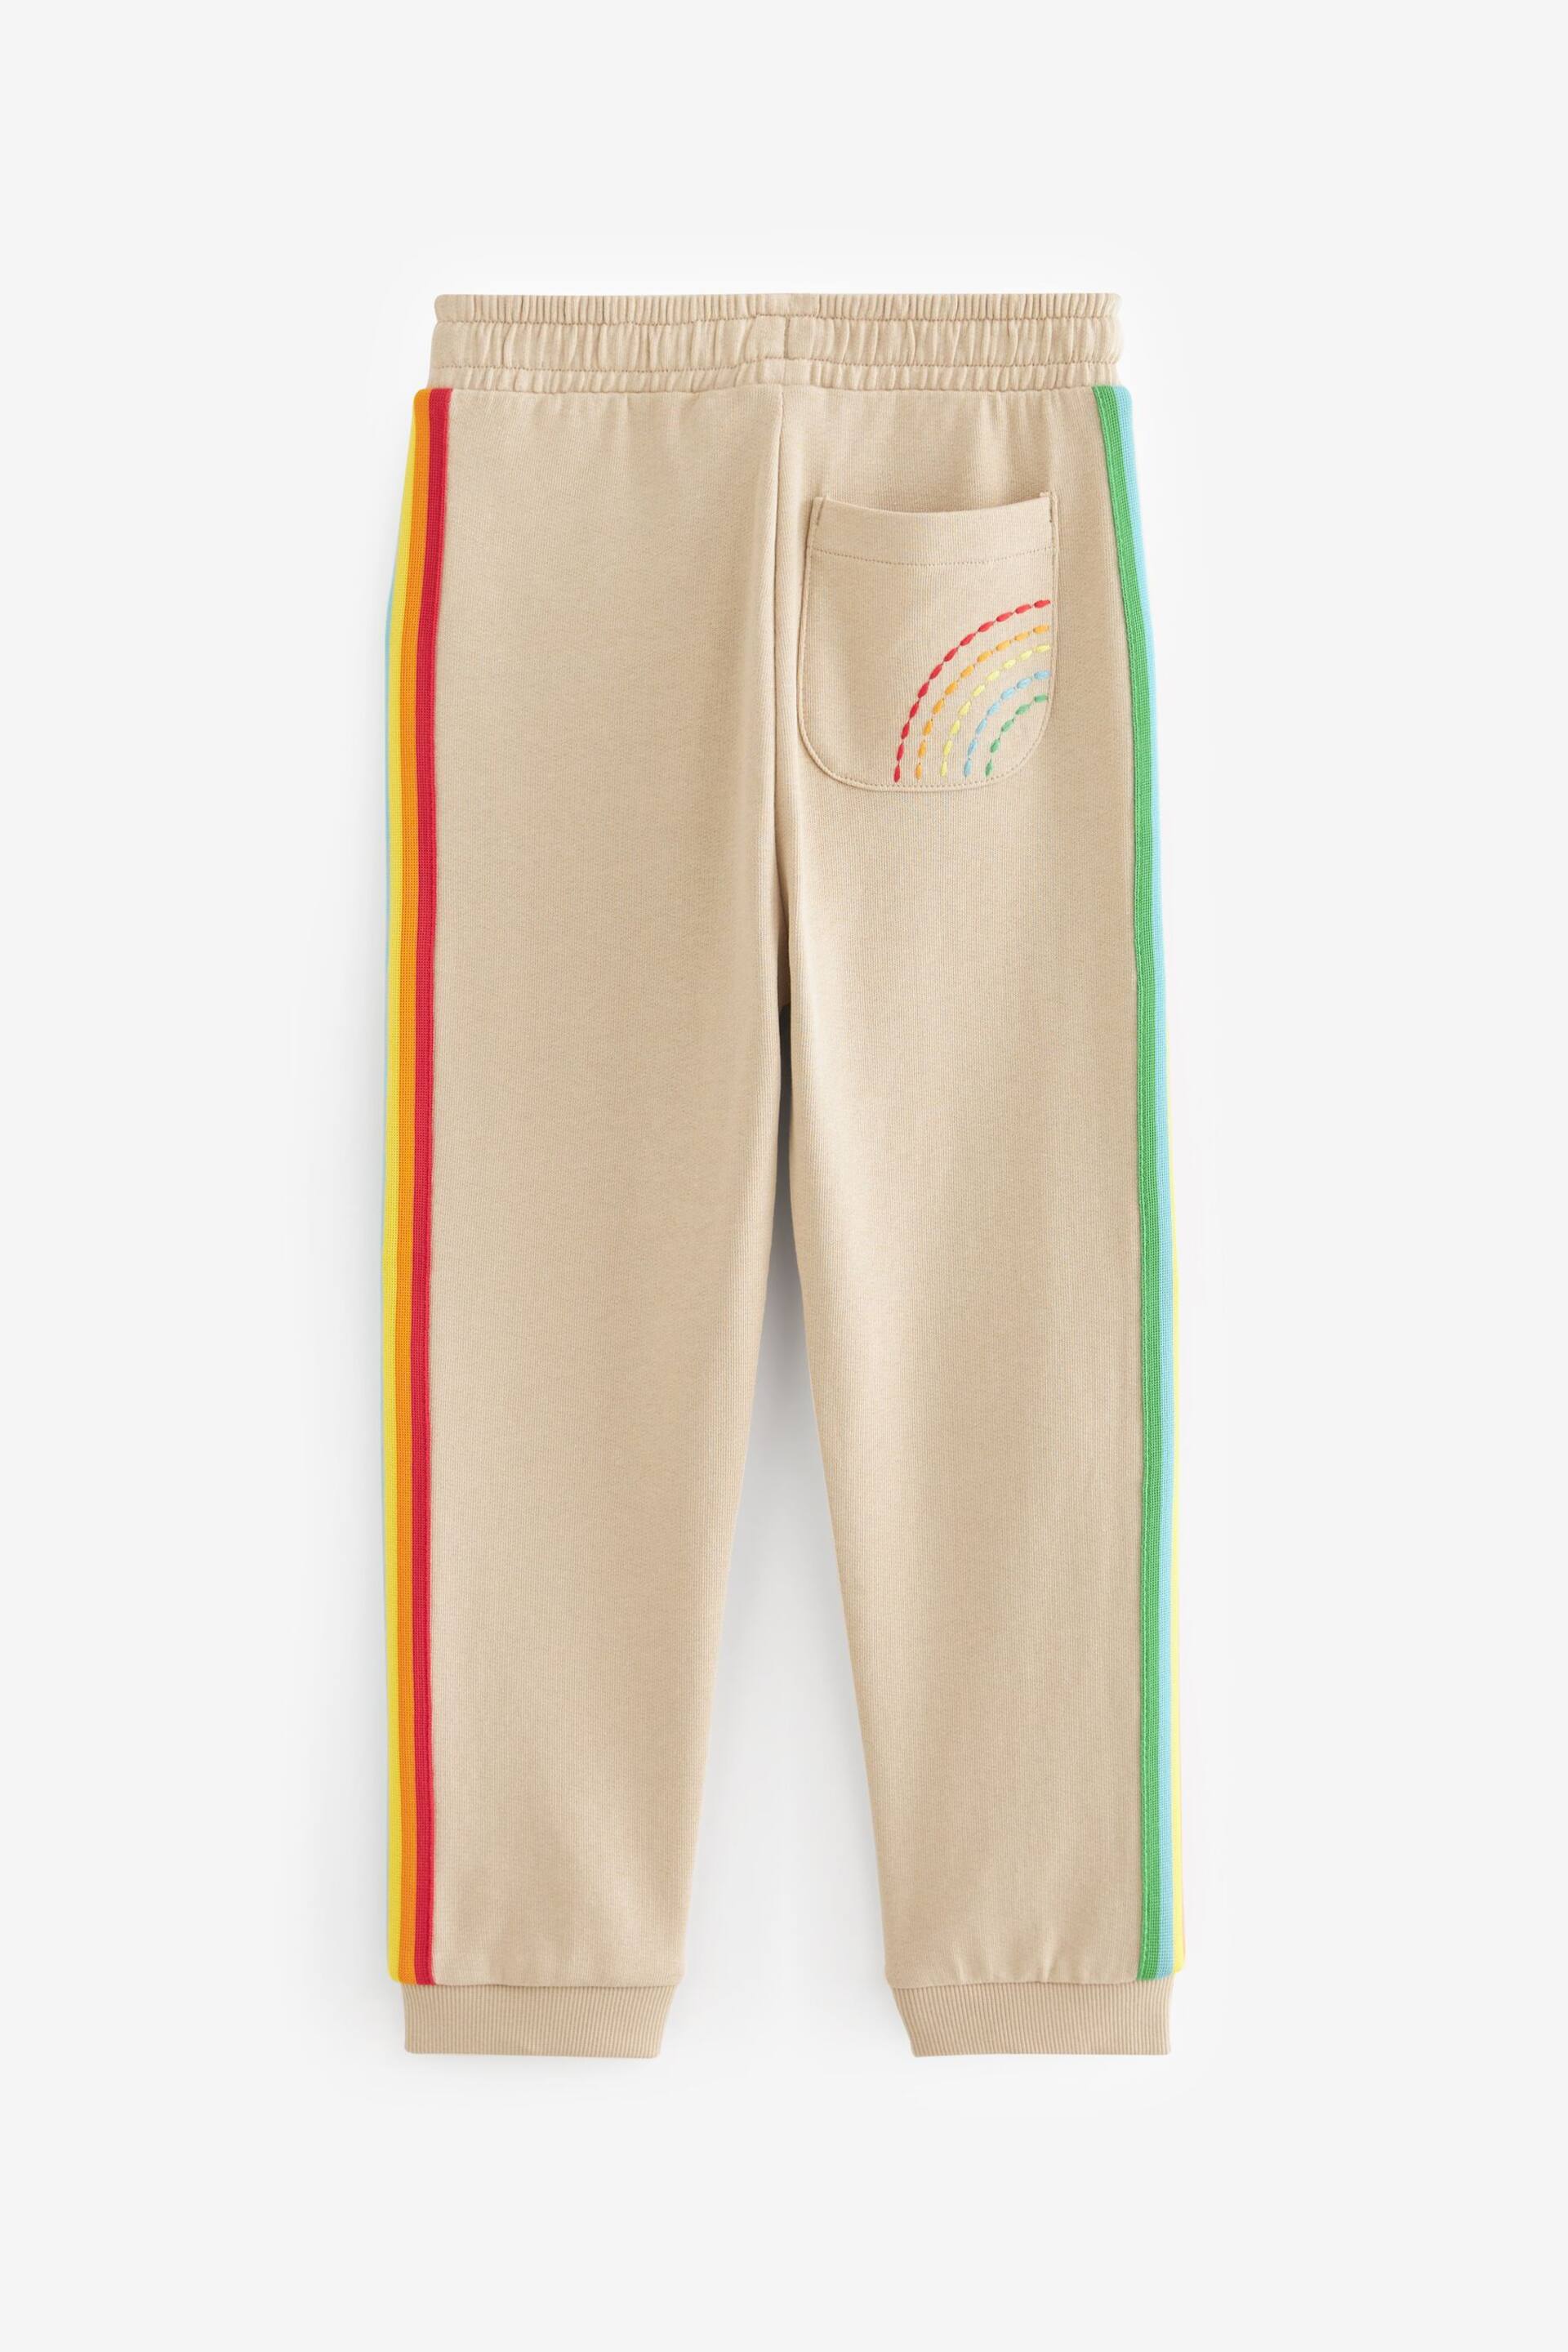 Little Bird by Jools Oliver Stone Rainbow Striped Joggers - Image 7 of 9